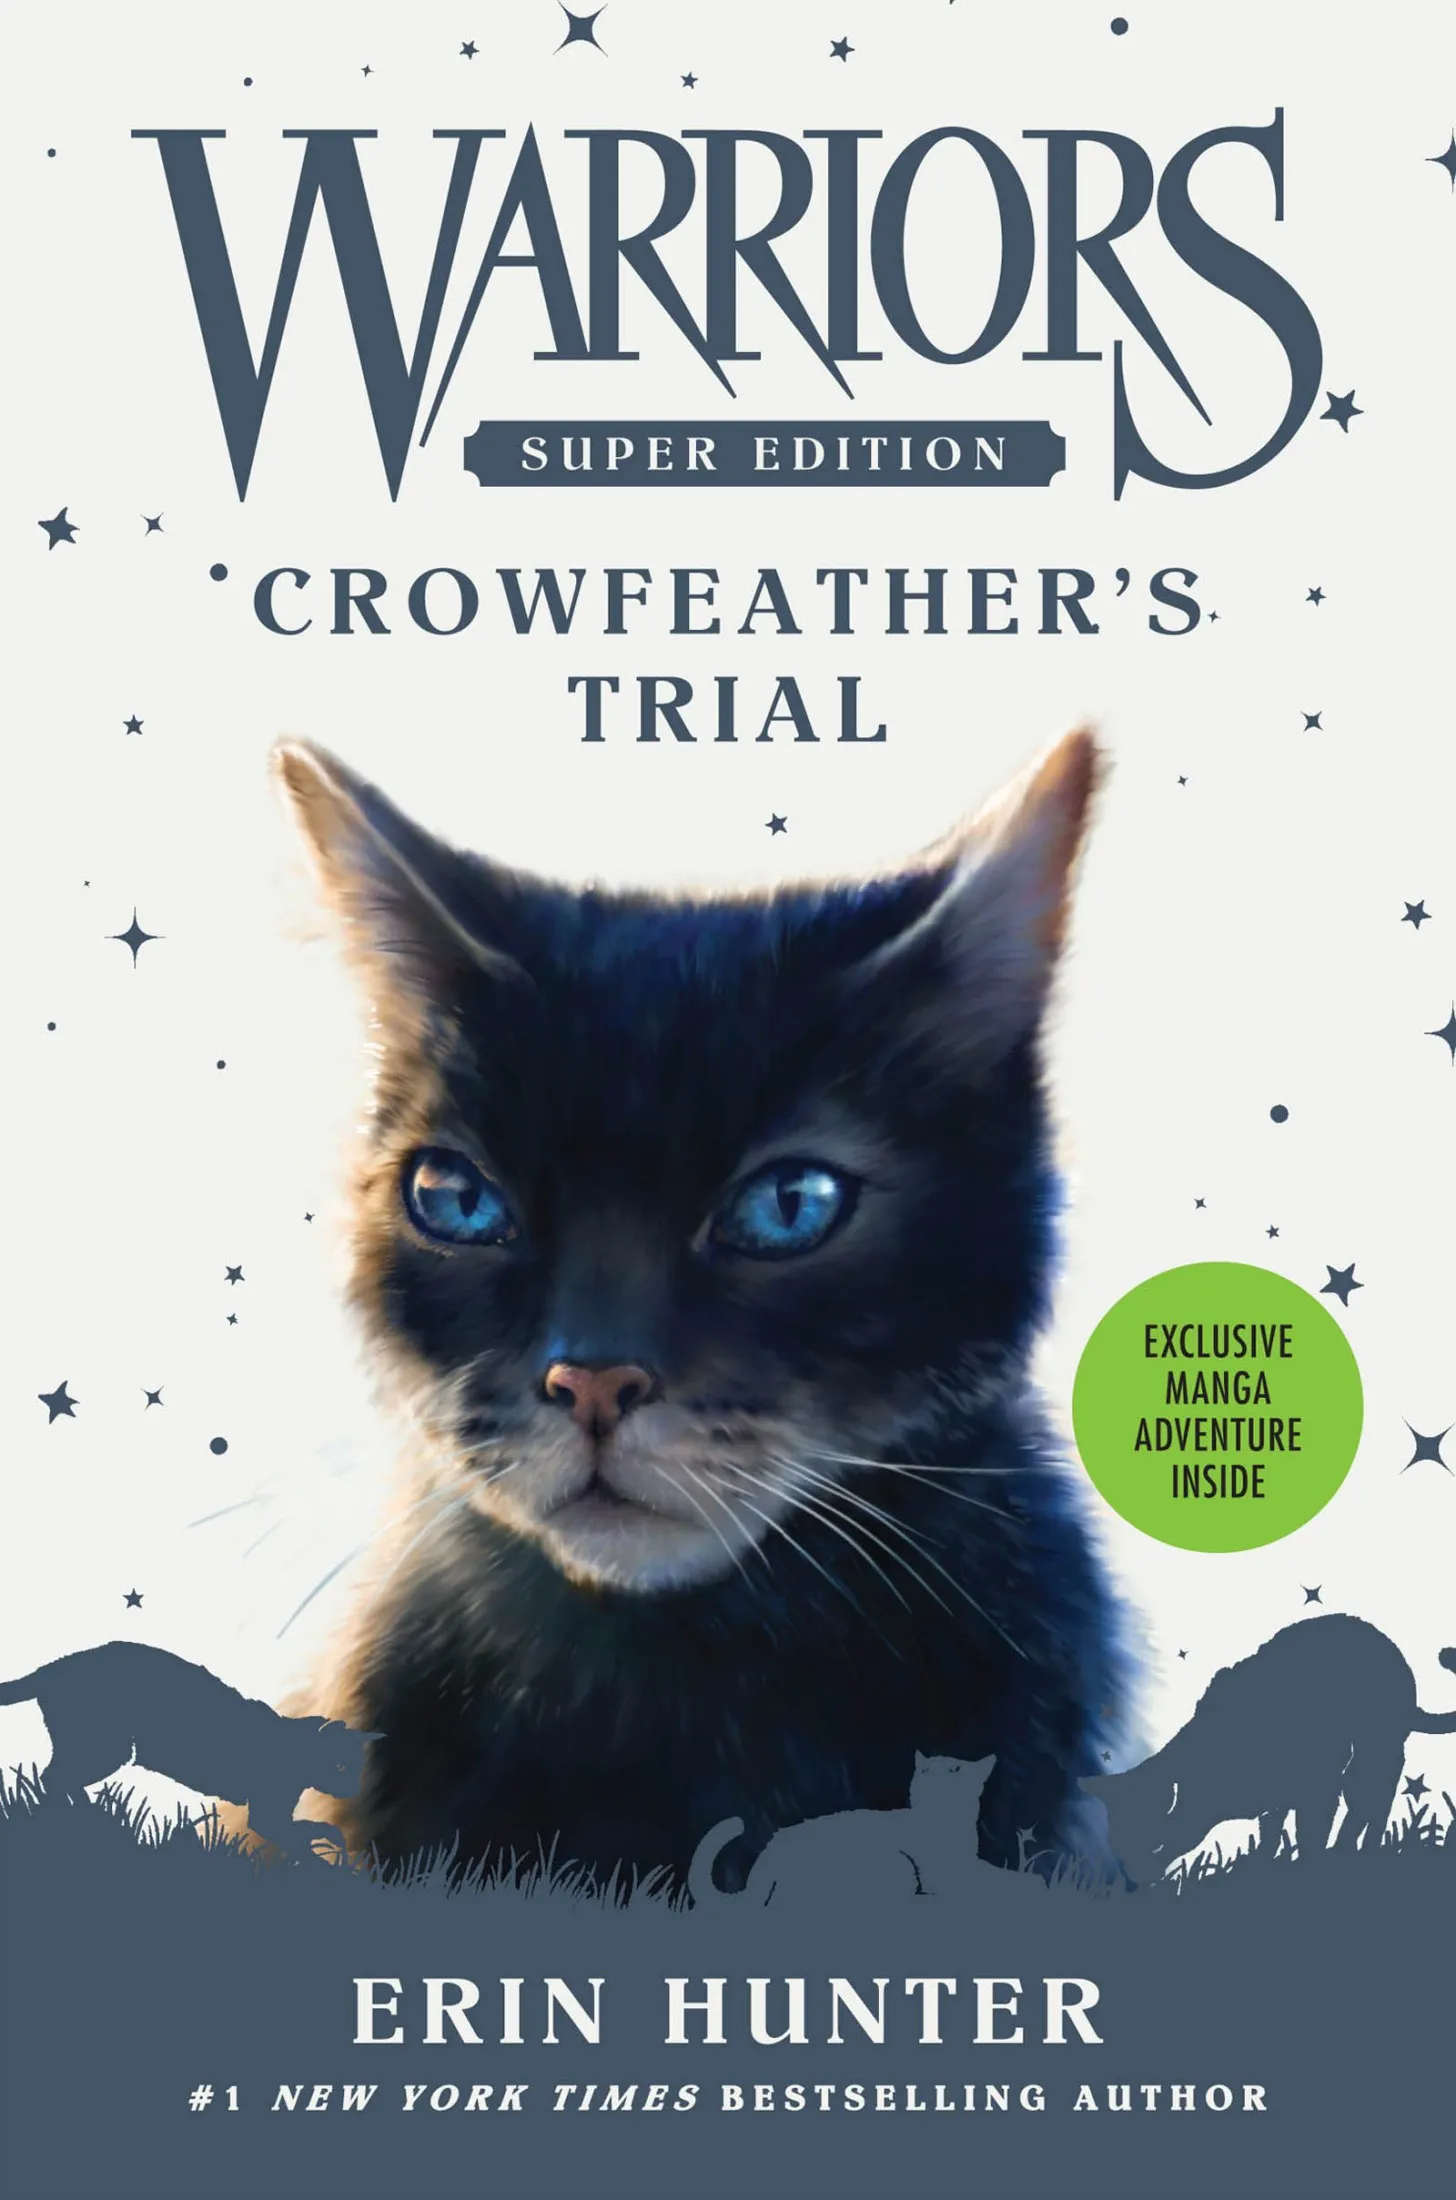 Crowfeather's Trial (Warriors: Super Edition #11)